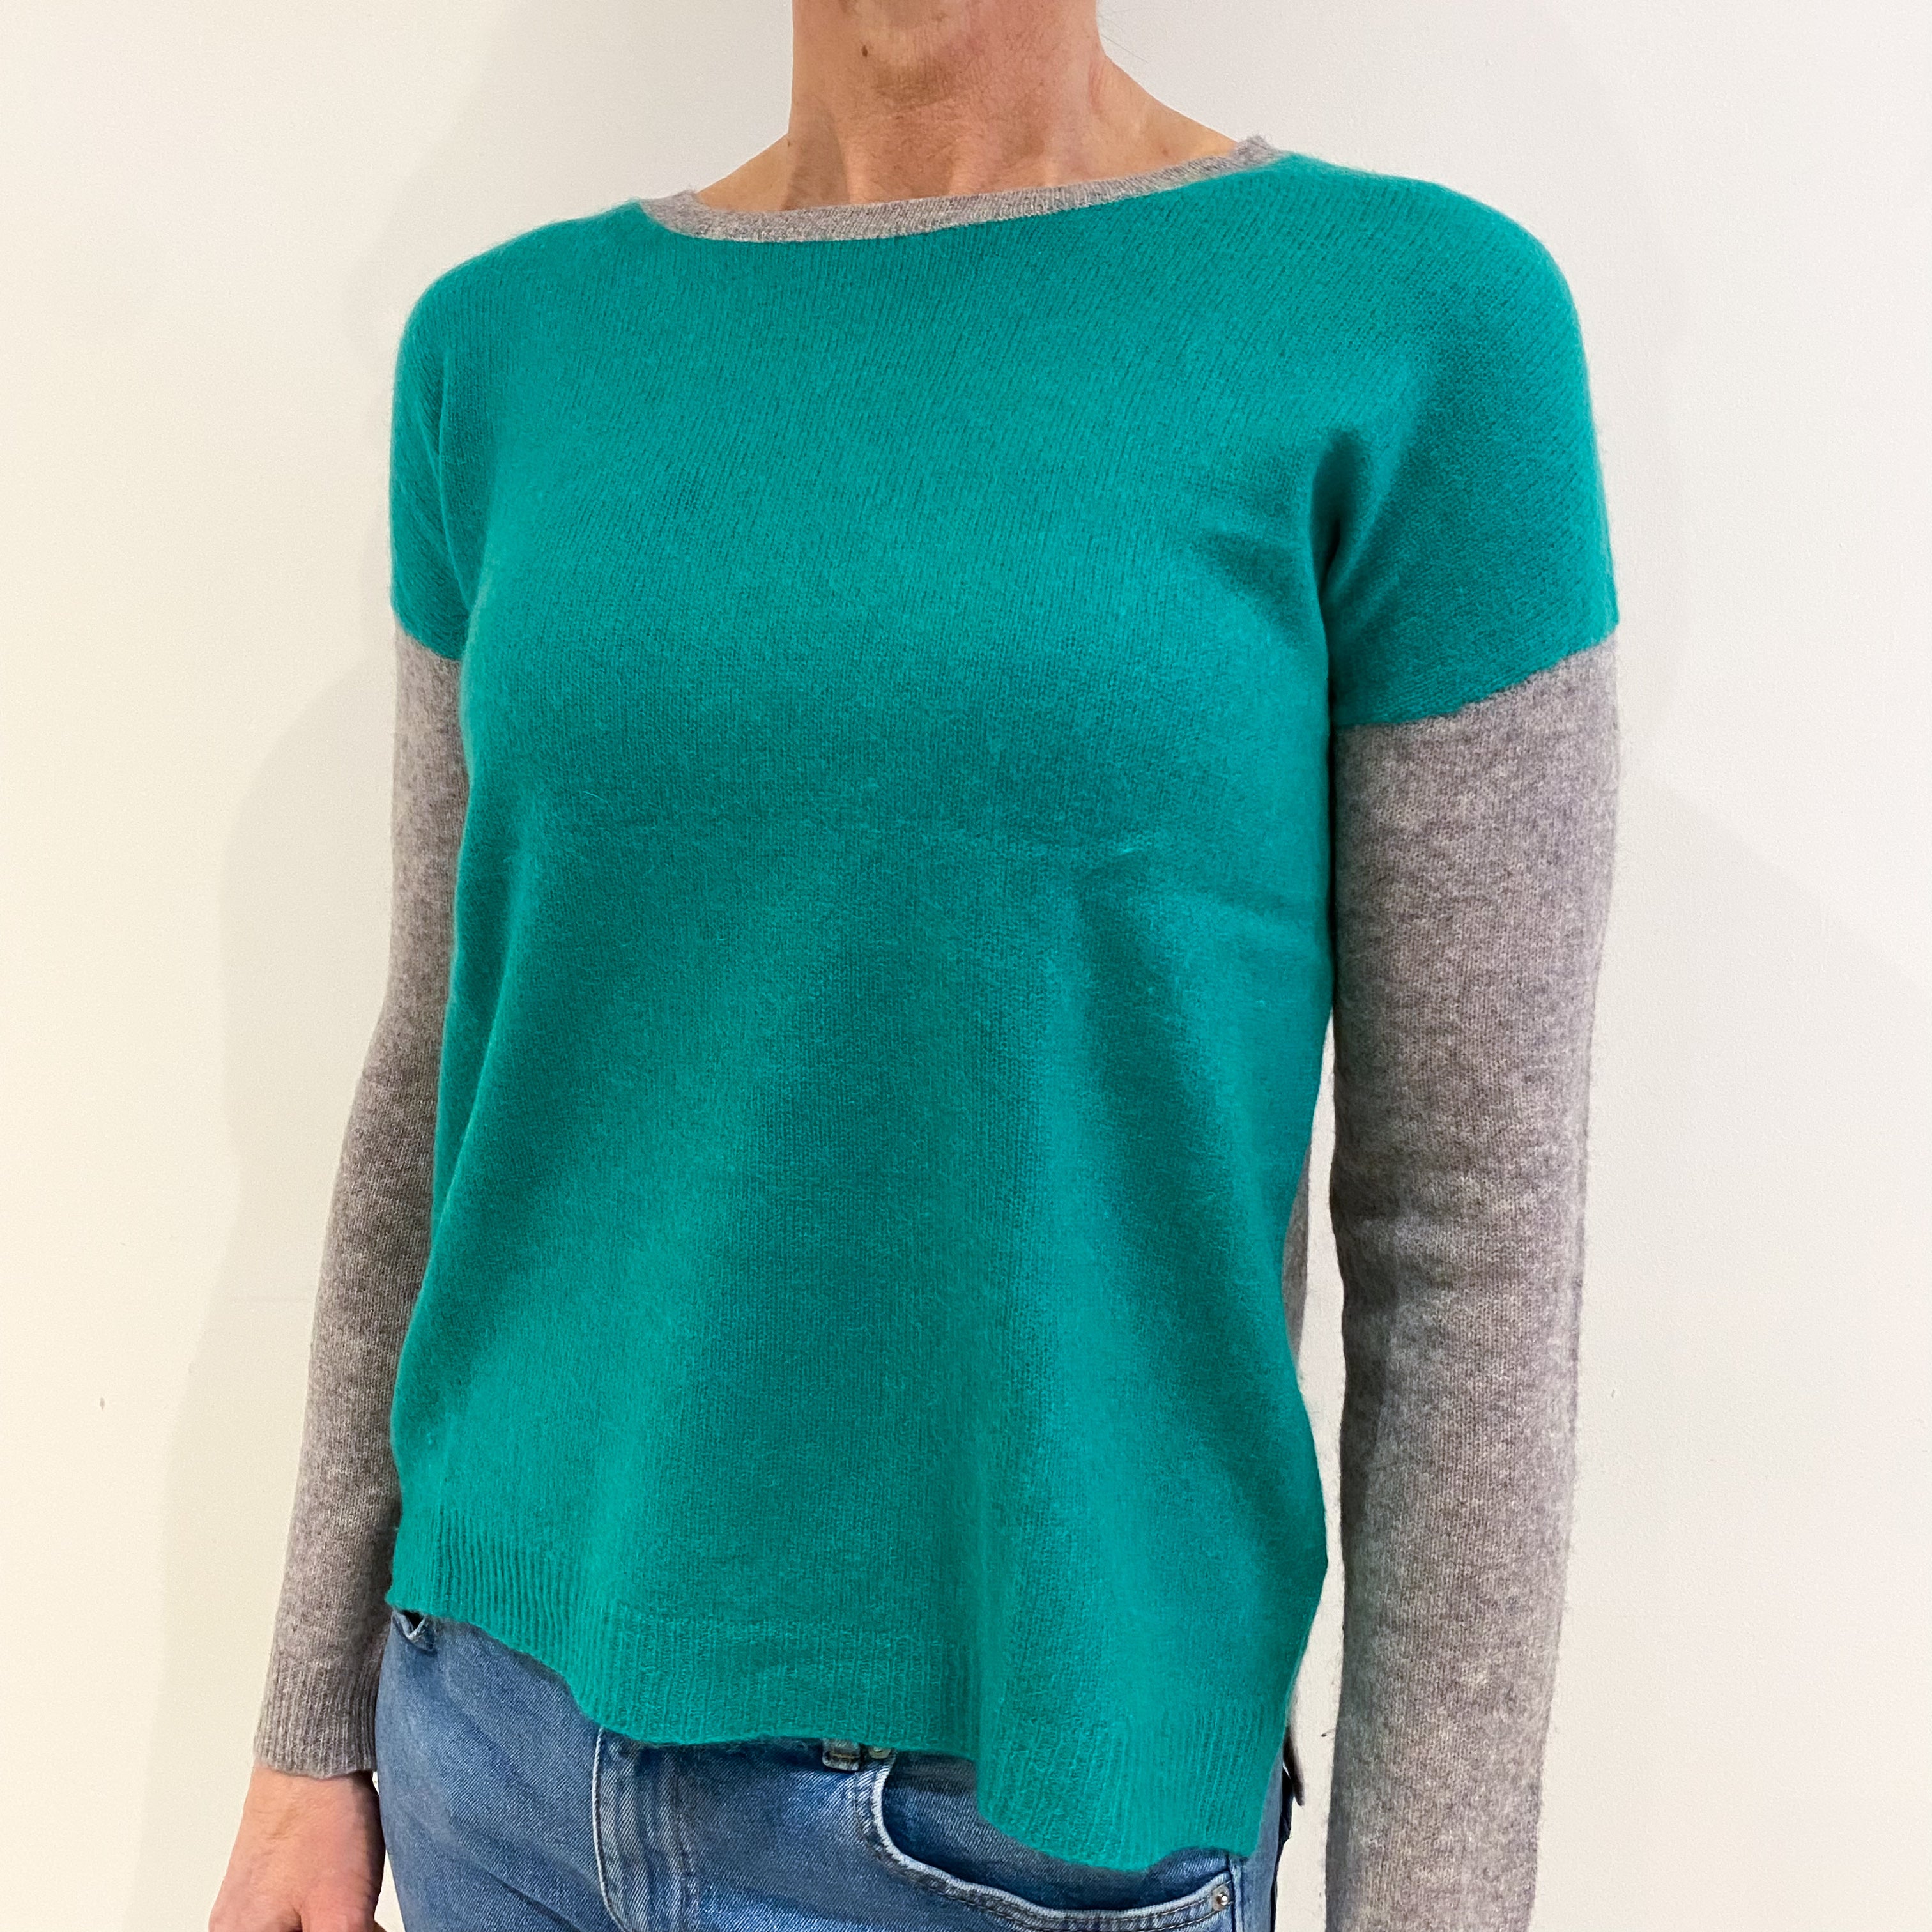 Jade Green and Smoke Grey Cashmere Crew Neck Jumper Small